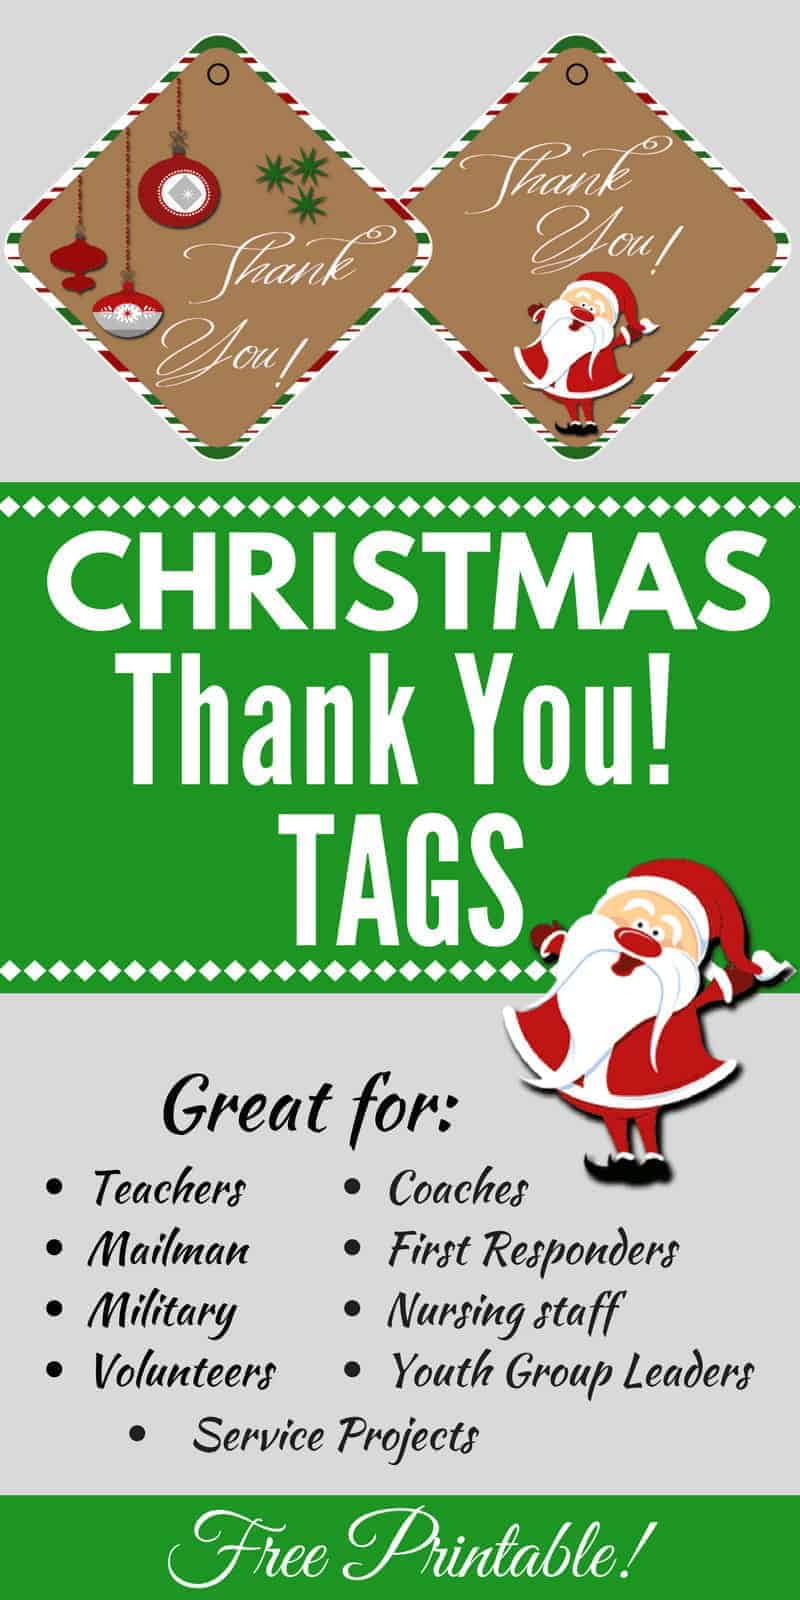 Use these cute christmas thank you tags for teachers, volunteers, nursing staff, coaches, first responders, or to anyone you want to tell "thanks! "